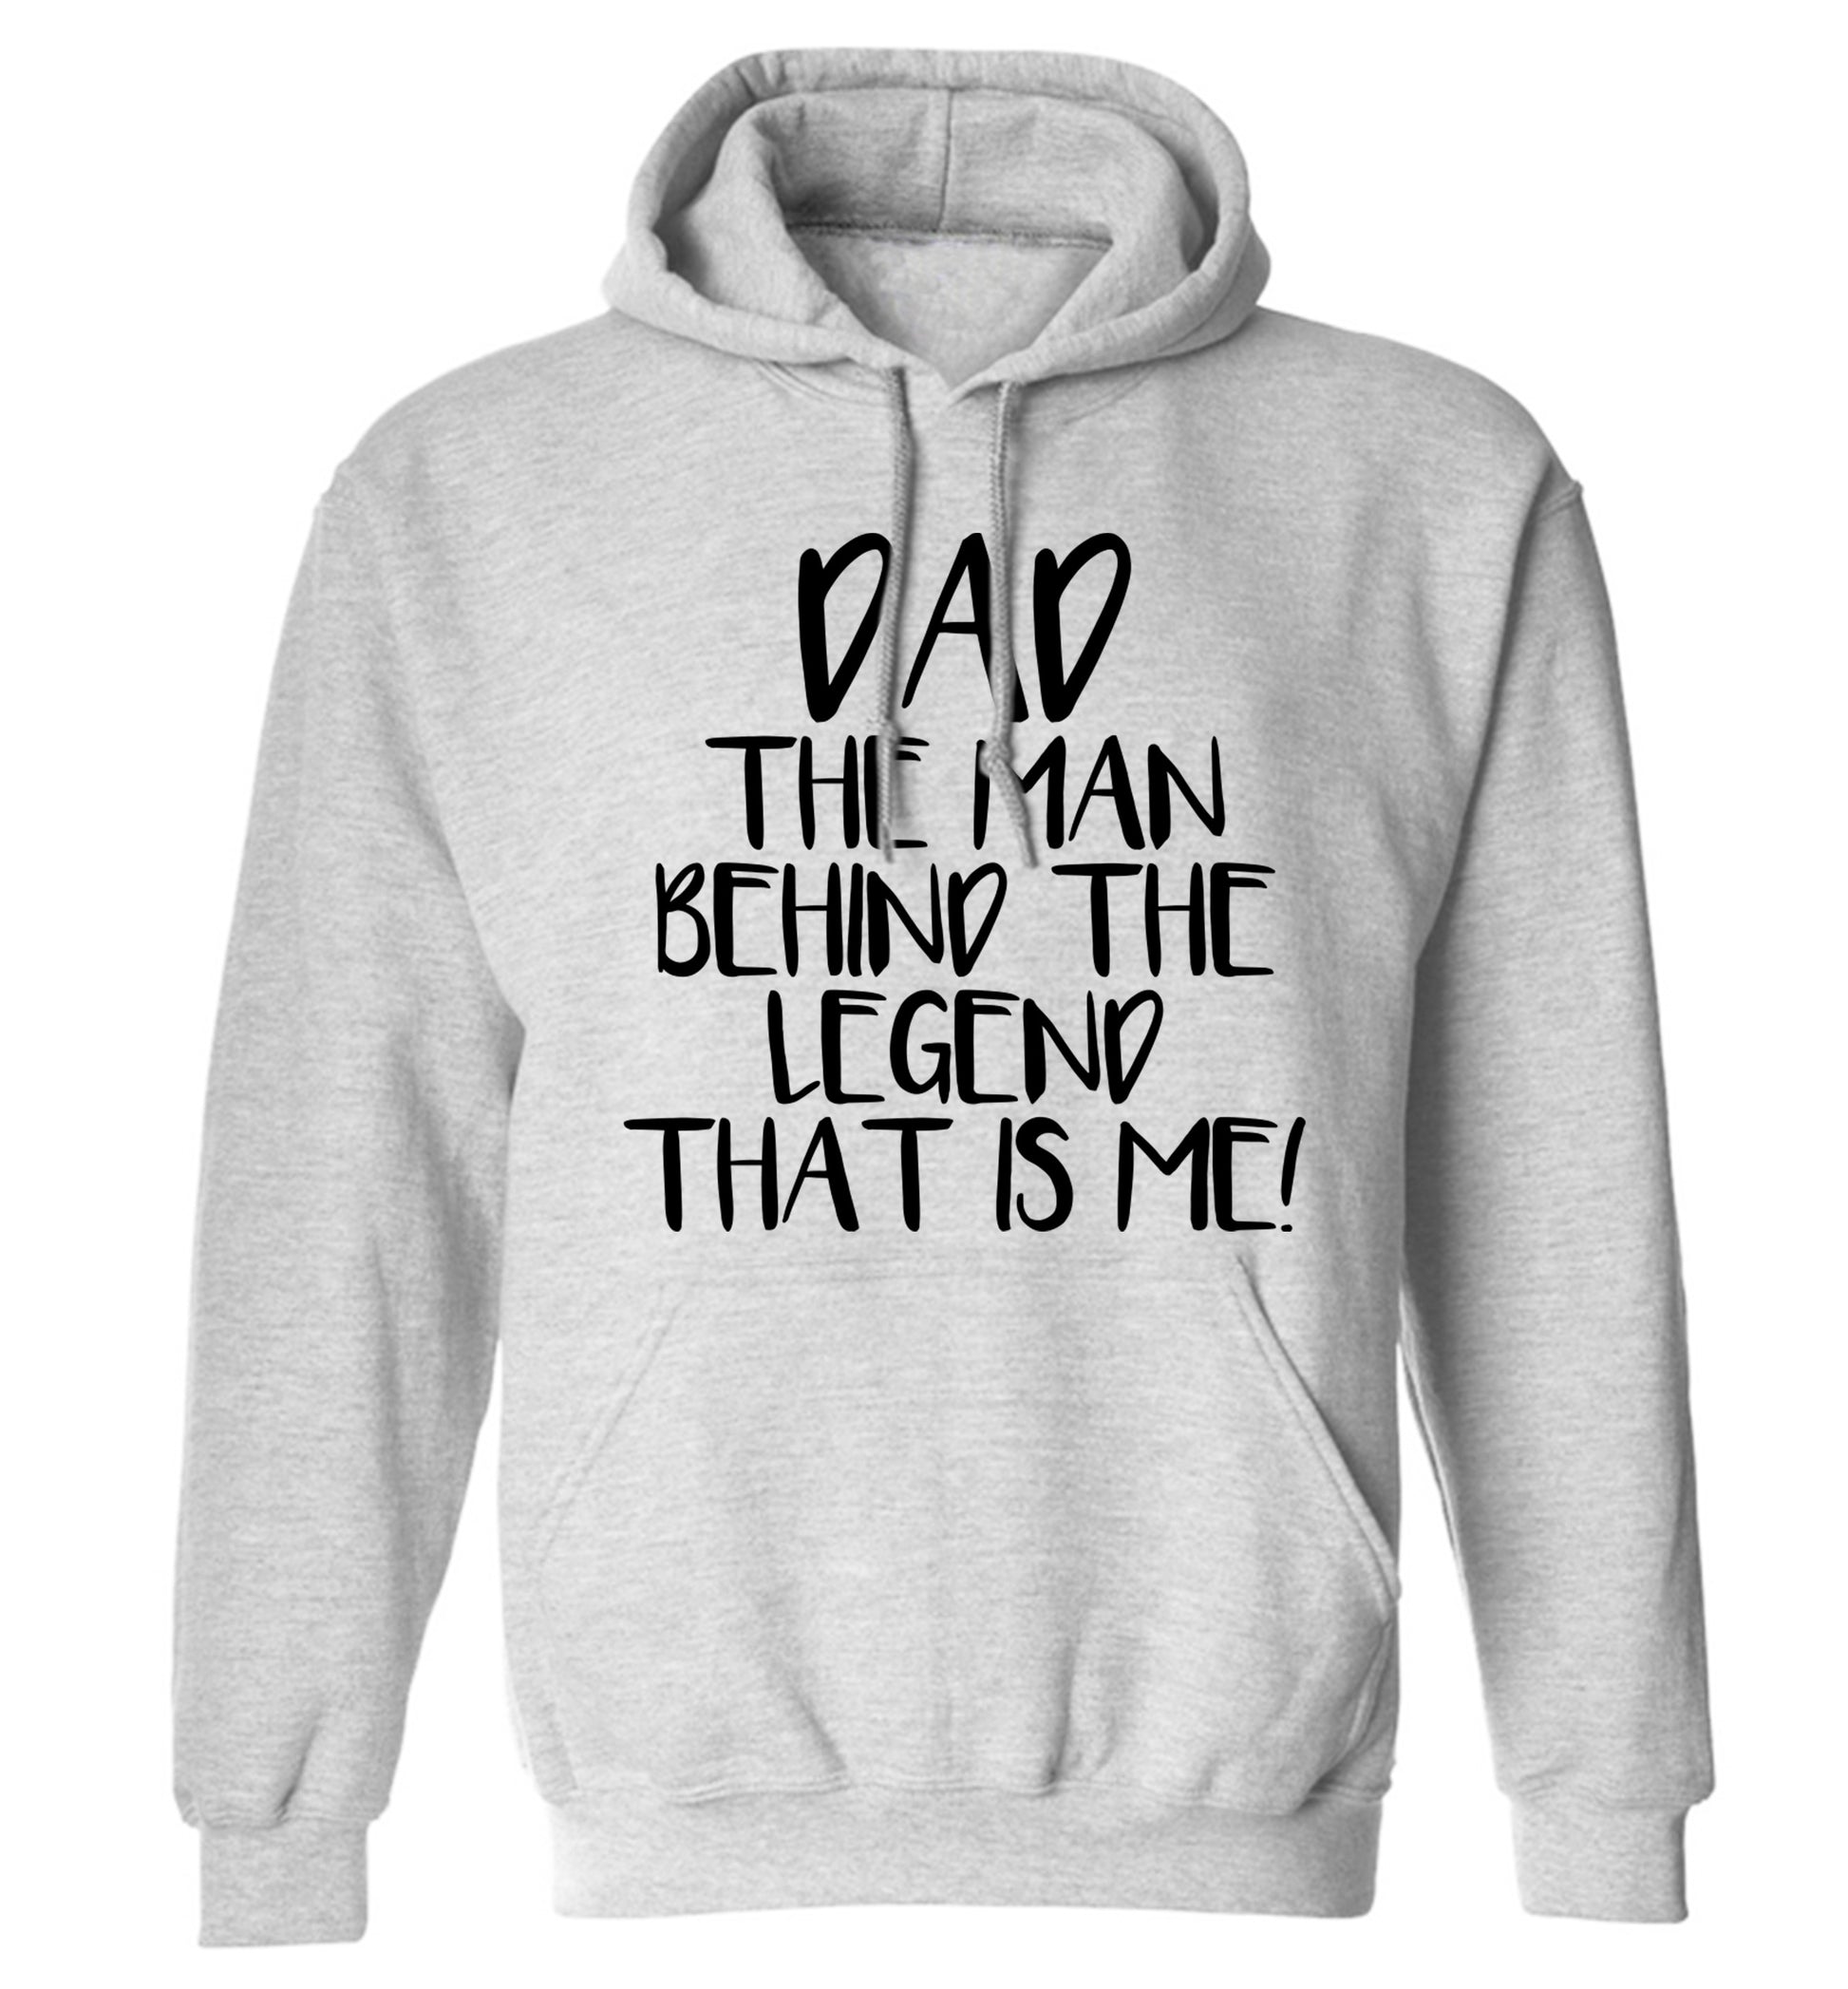 Dad the man behind the legend that is me! adults unisex grey hoodie 2XL